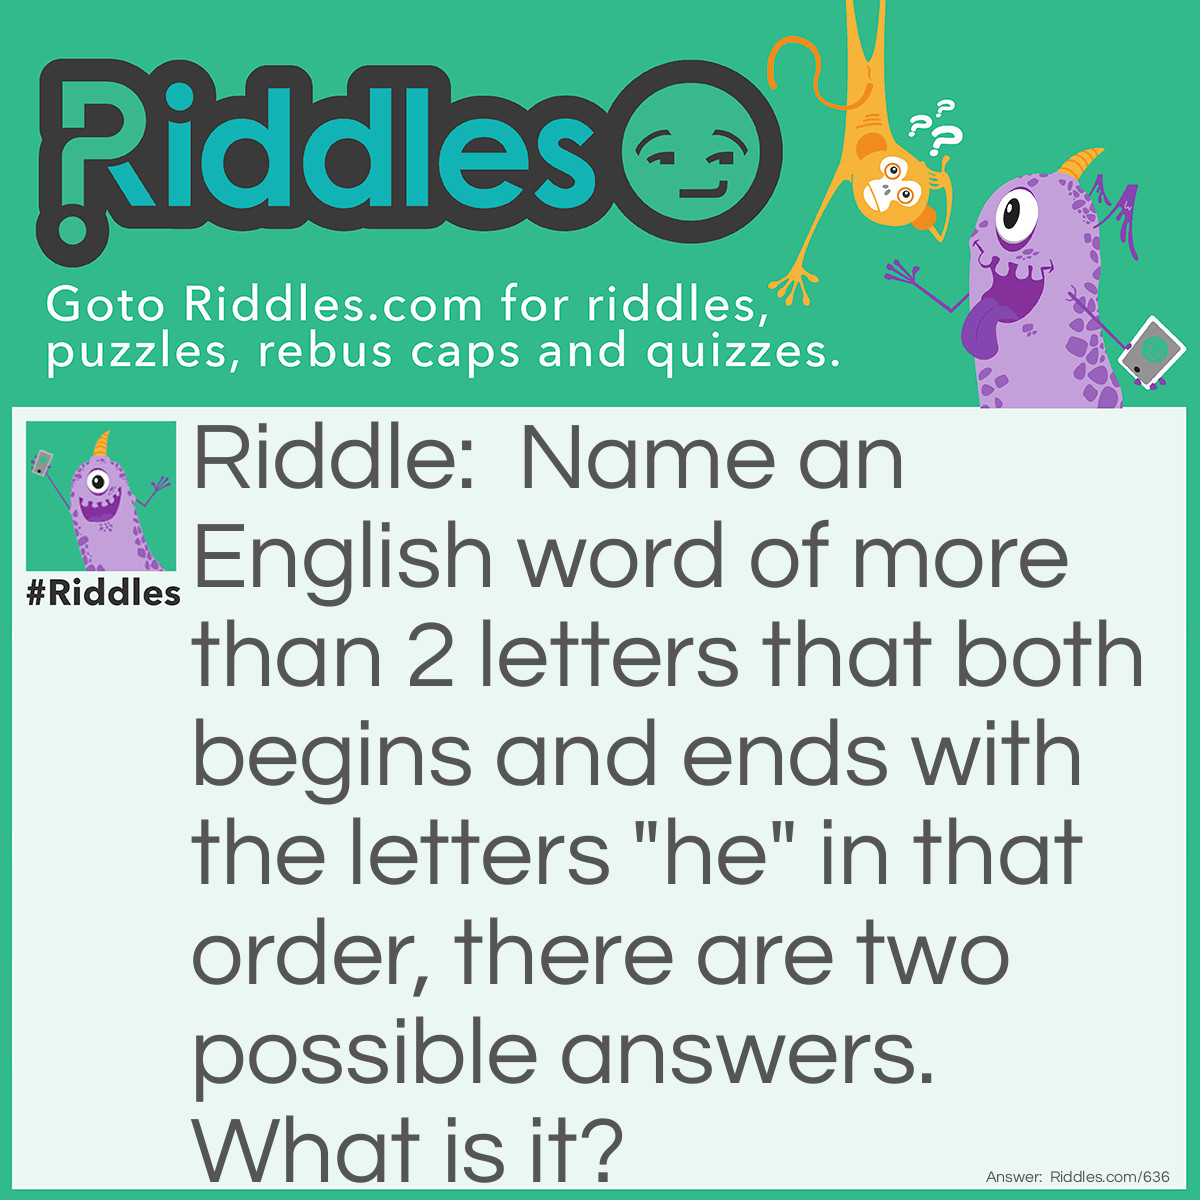 Riddle: Name an English word of more than 2 letters that both begins and ends with the letters "he" in that order, there are two possible answers. What is it? Answer: Headache or Heartache.